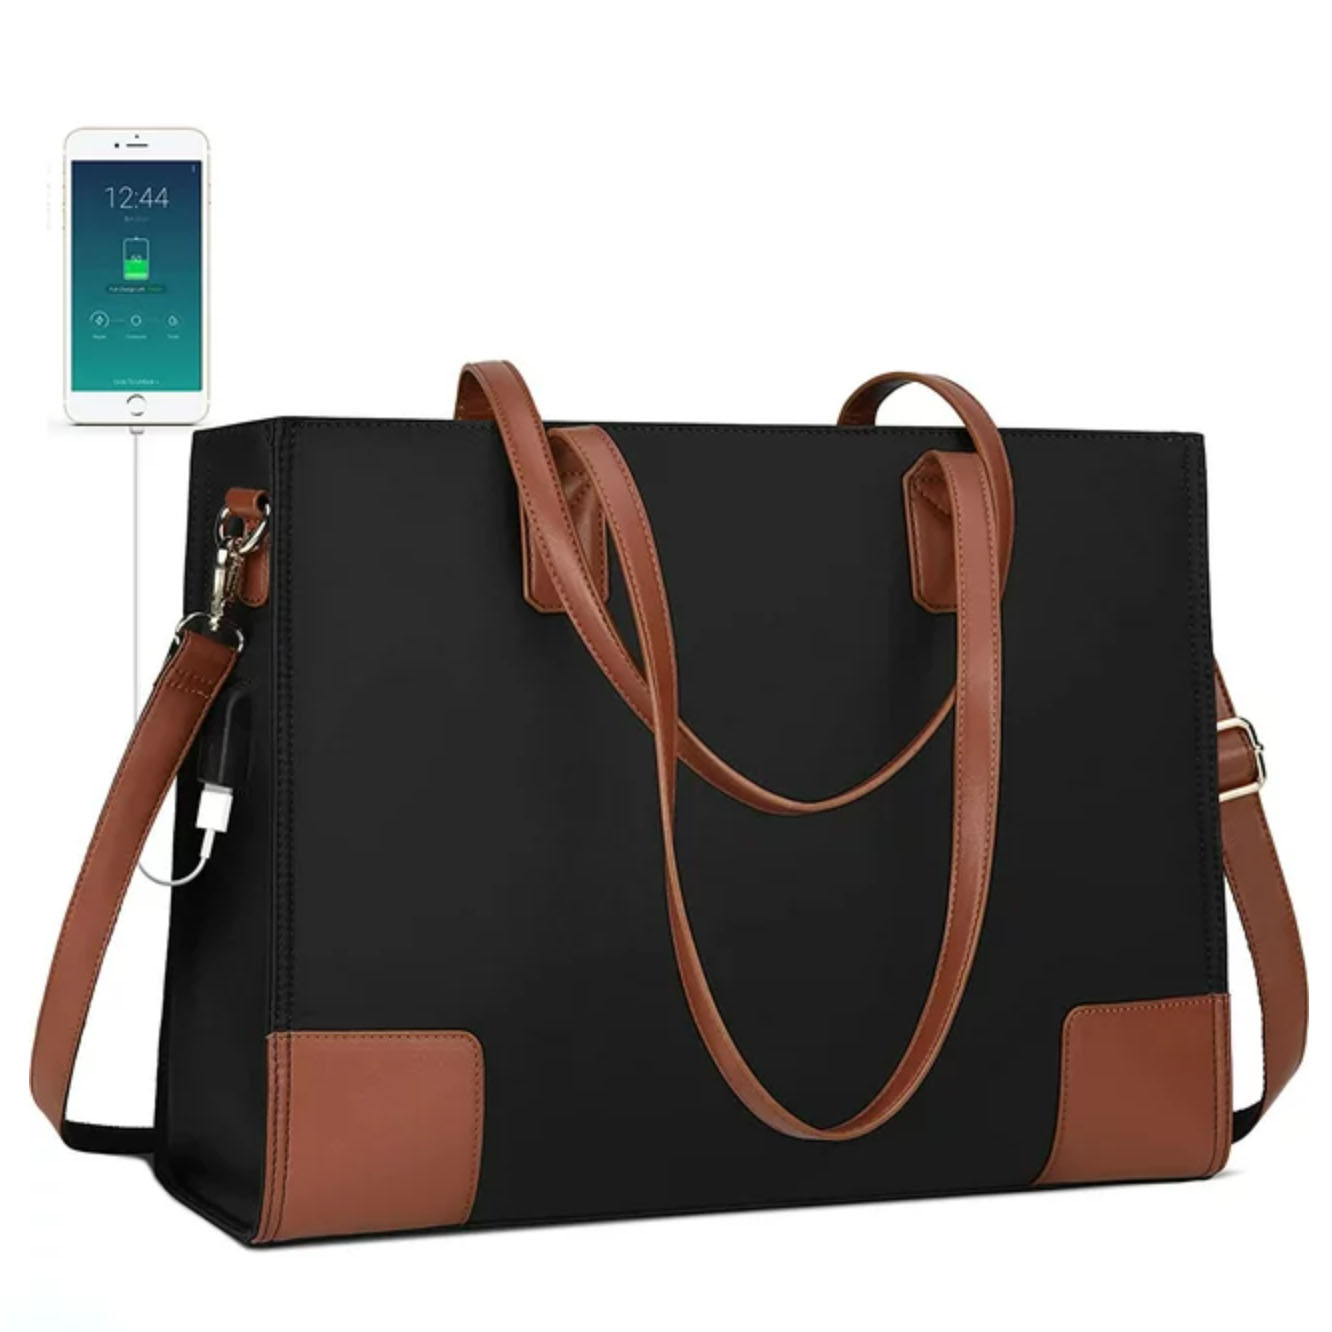 Black and brown tote bag with charging phone